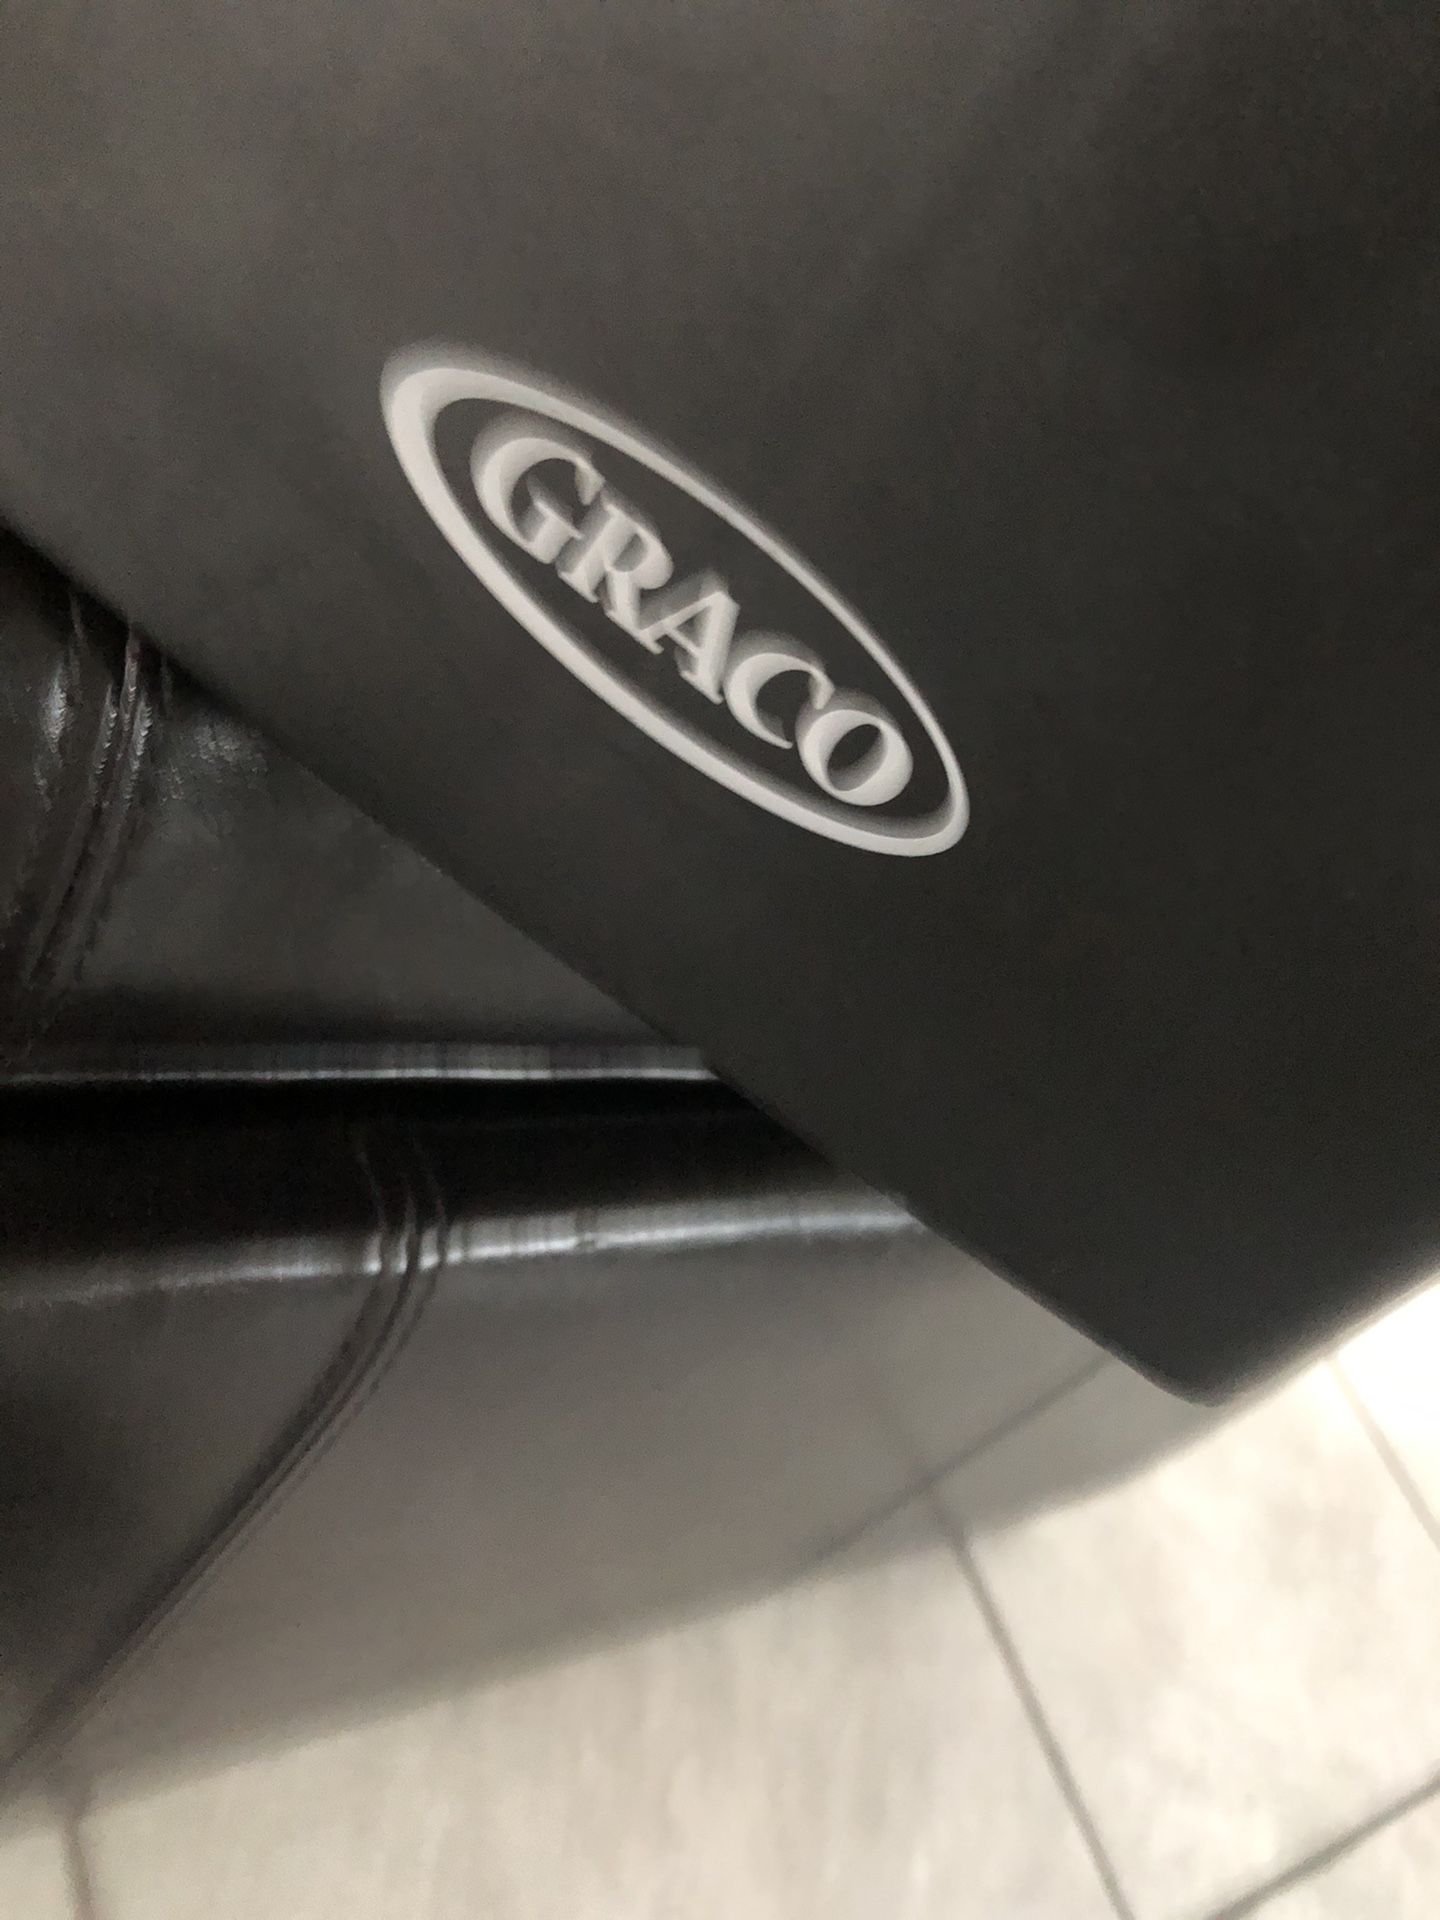 Graco brand baby car seat